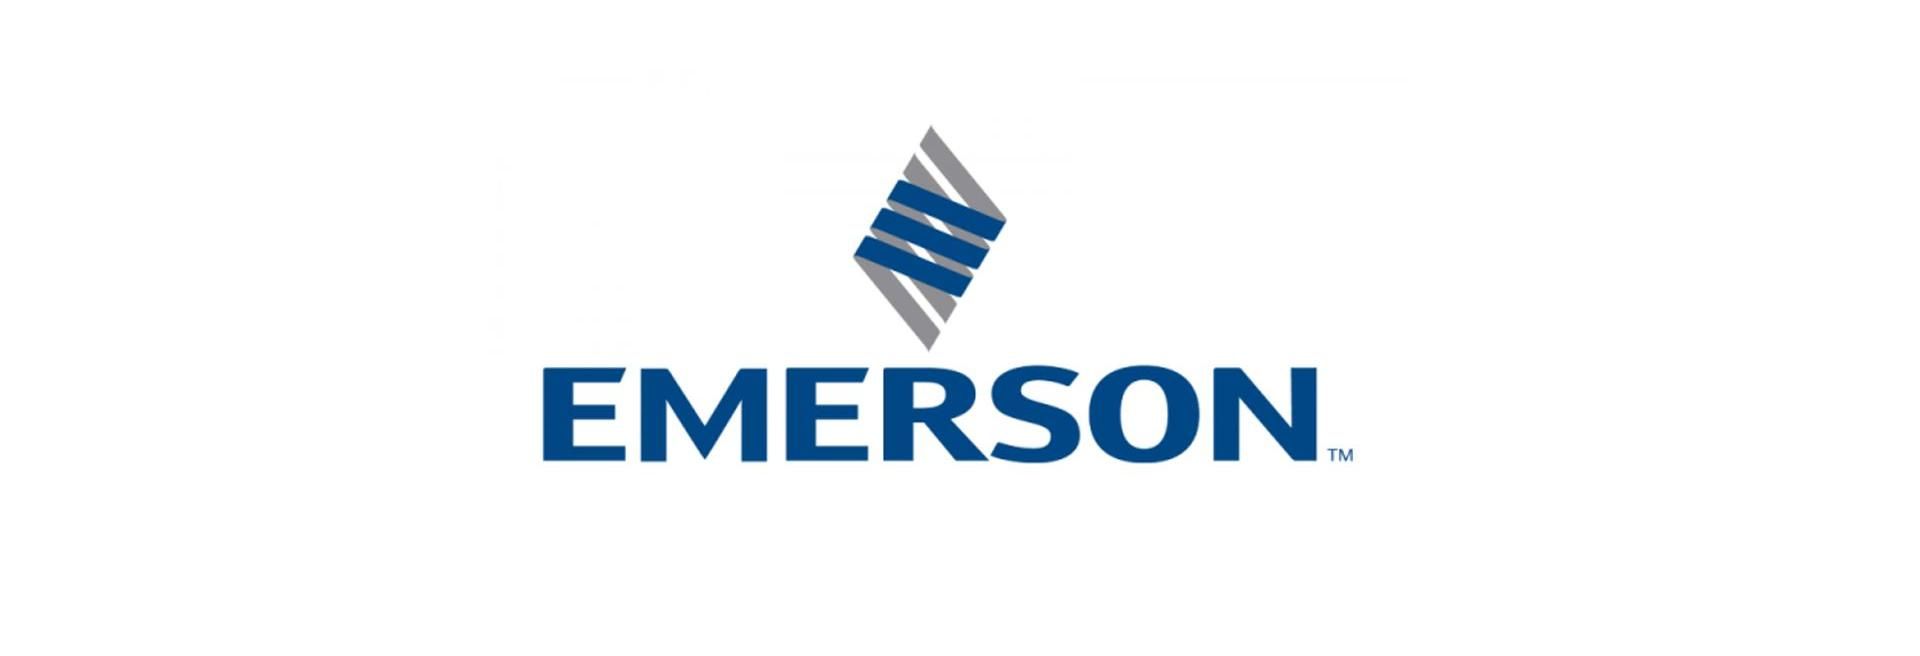 Emerson Expands Manufacturing Facility in Eger - VIDEO REPORT